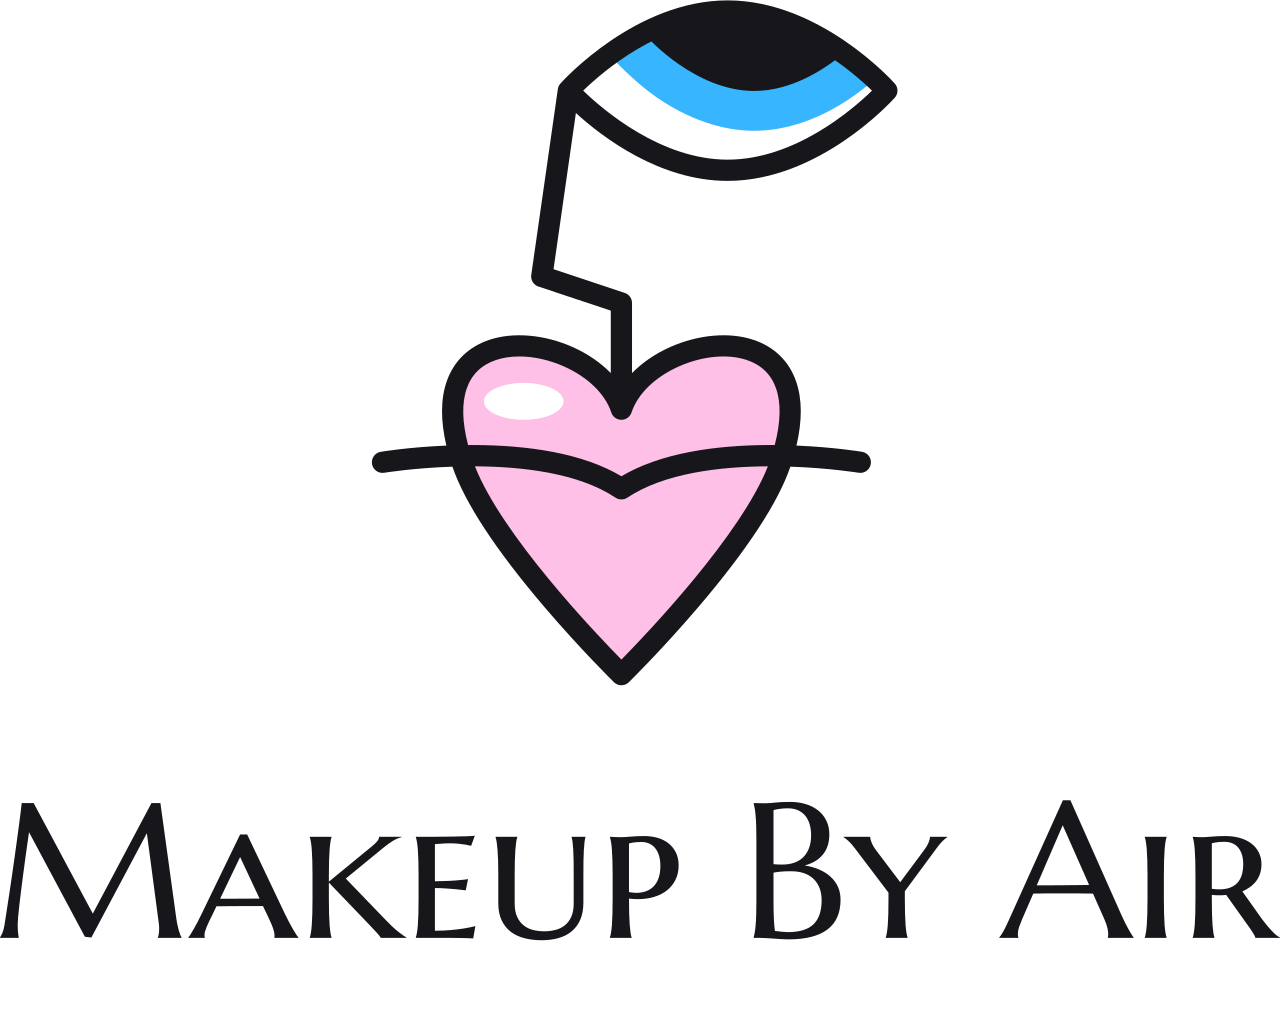 Makeup By Air's web page